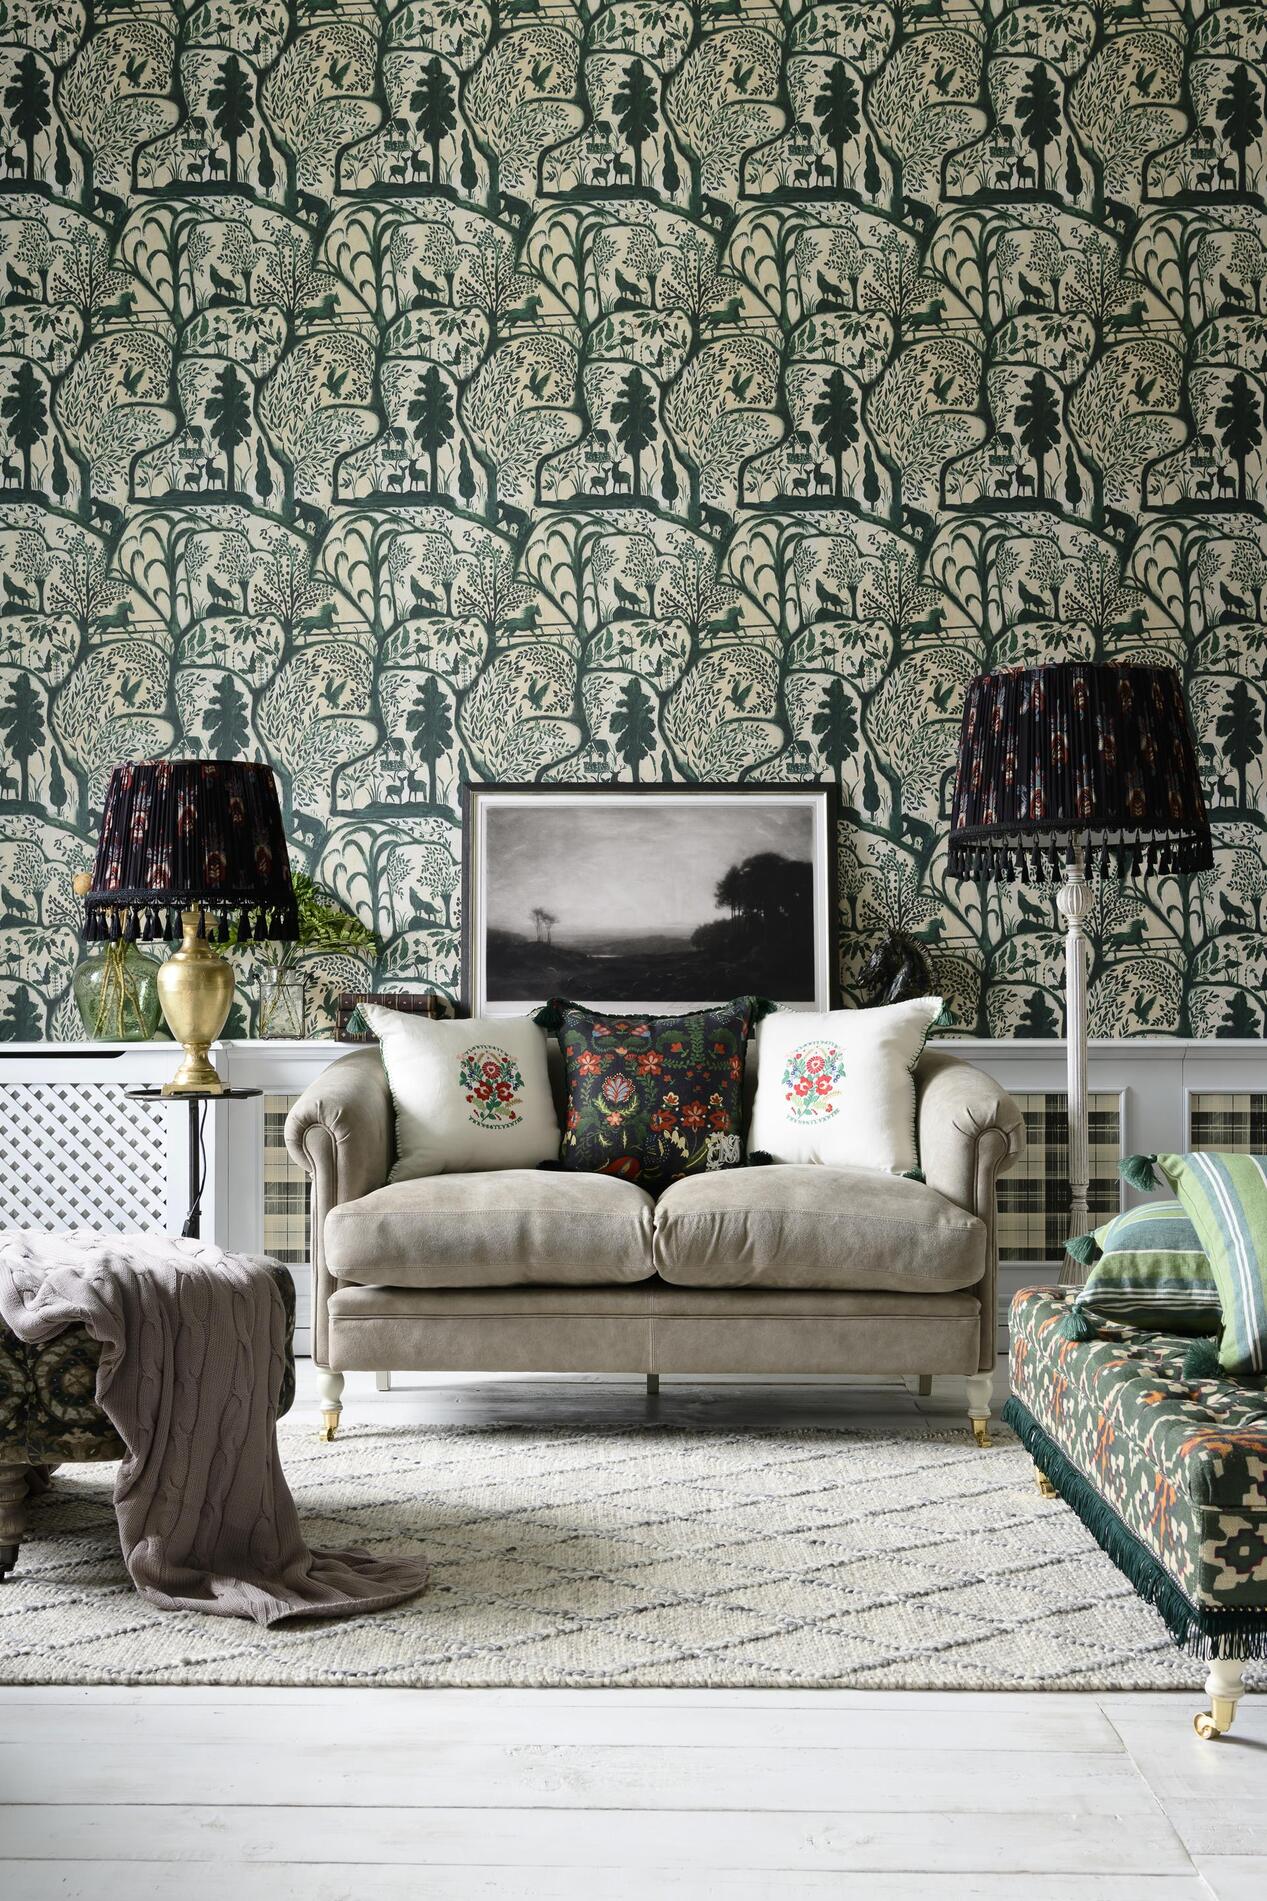 Mind The Gap, The Enchanted Woodland Wallpaper